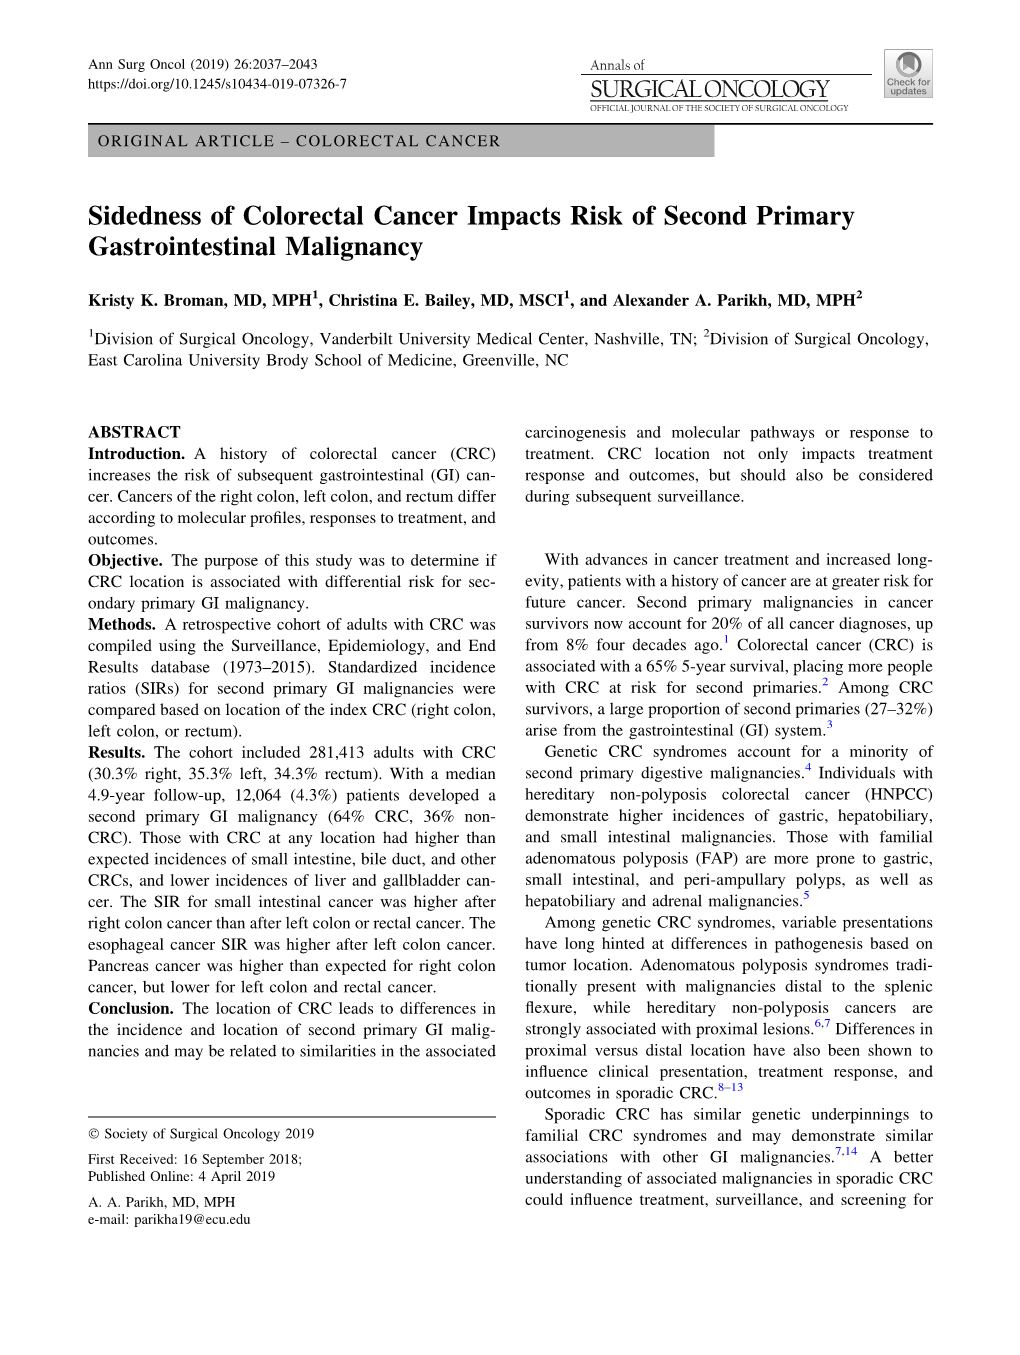 Sidedness of Colorectal Cancer Impacts Risk of Second Primary Gastrointestinal Malignancy